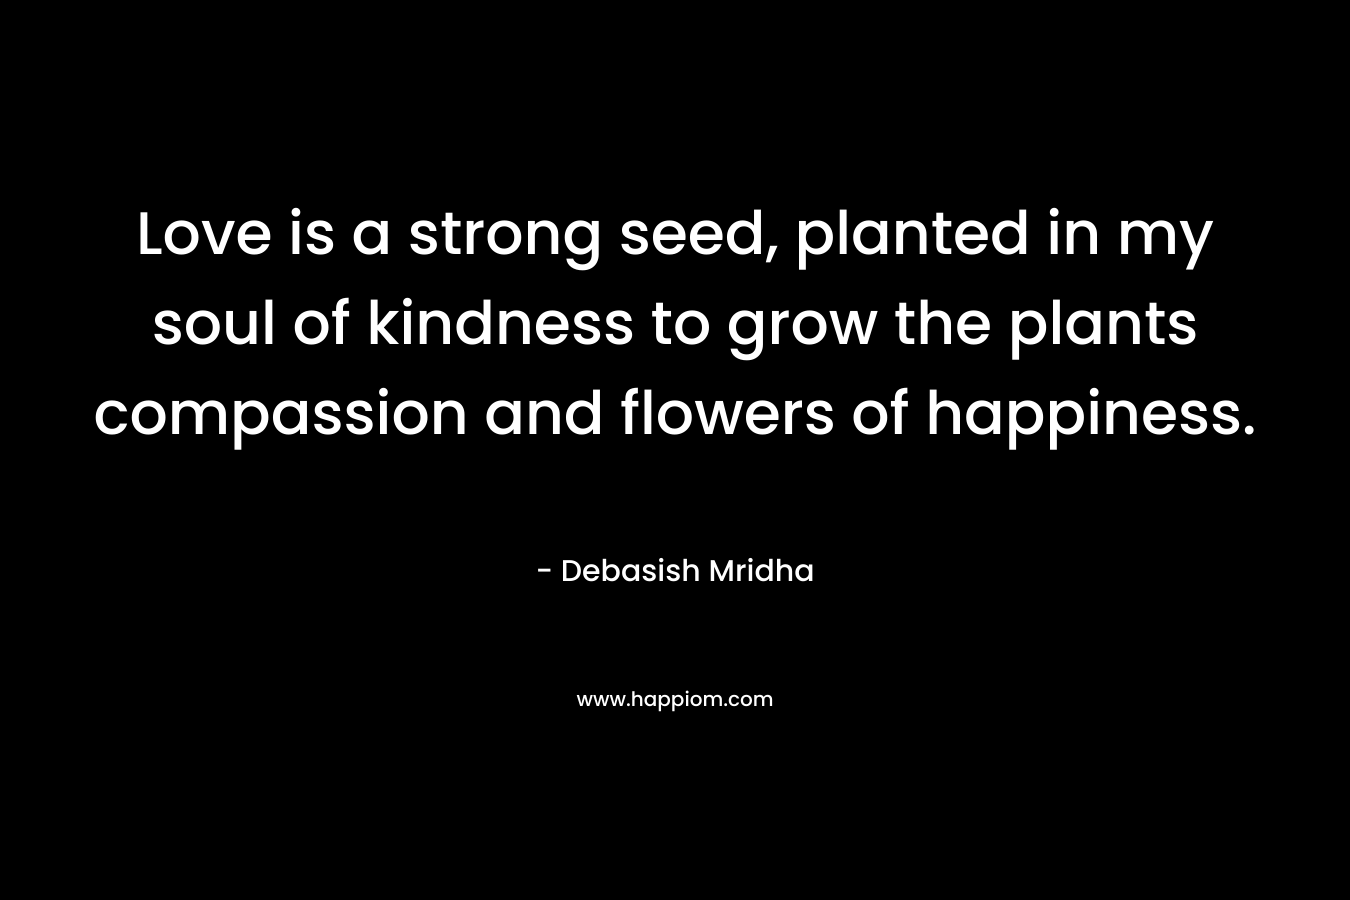 Love is a strong seed, planted in my soul of kindness to grow the plants compassion and flowers of happiness.